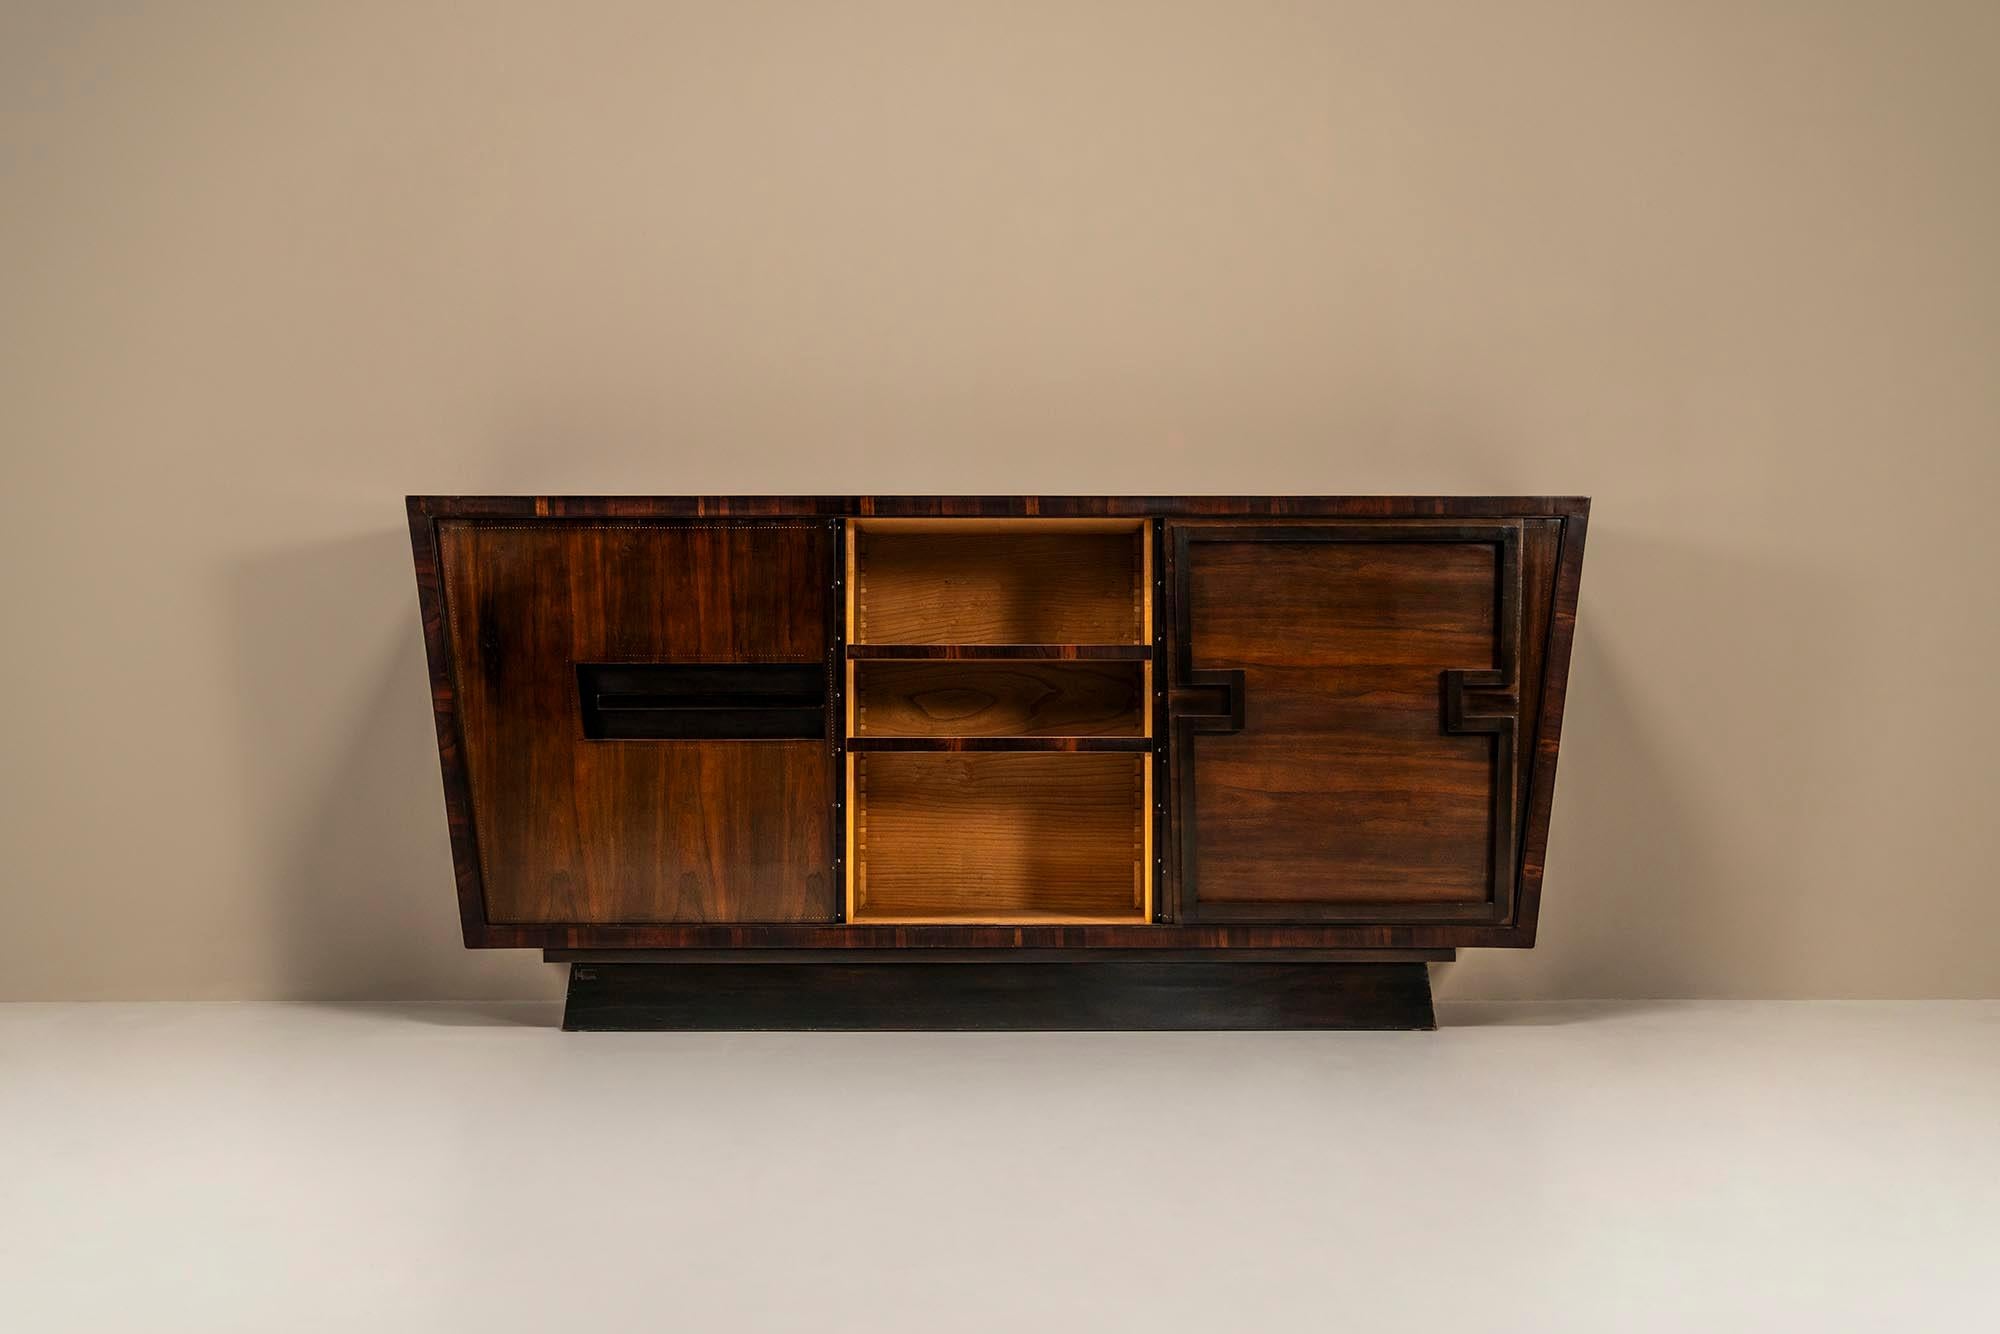 French Modernist Sideboard In Studded Rosewood By Andre Sornay, France 1940s For Sale